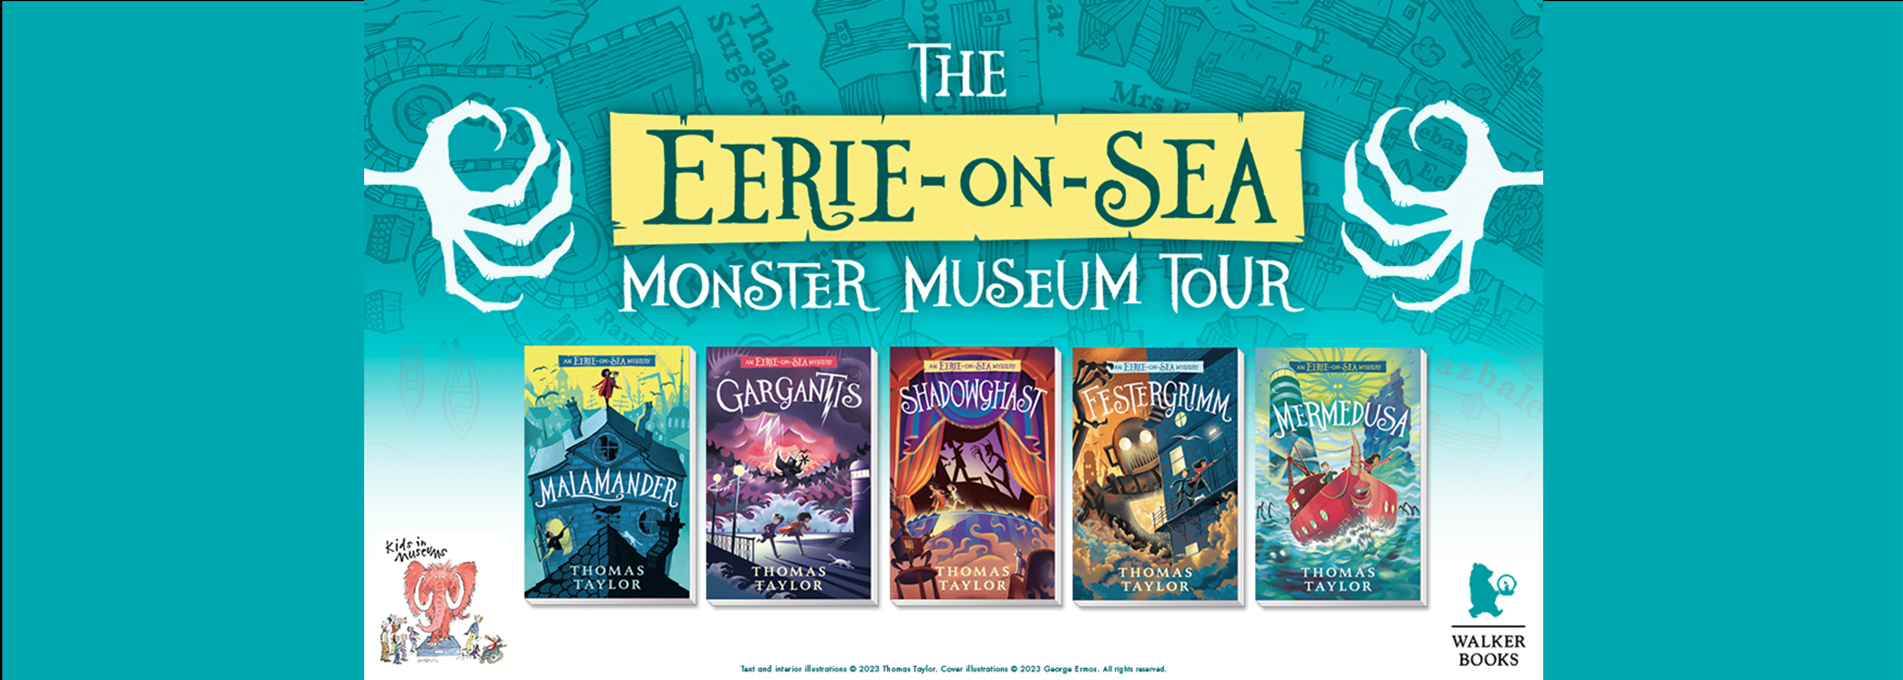 Eerie-On-Sea Monster Museum Tour